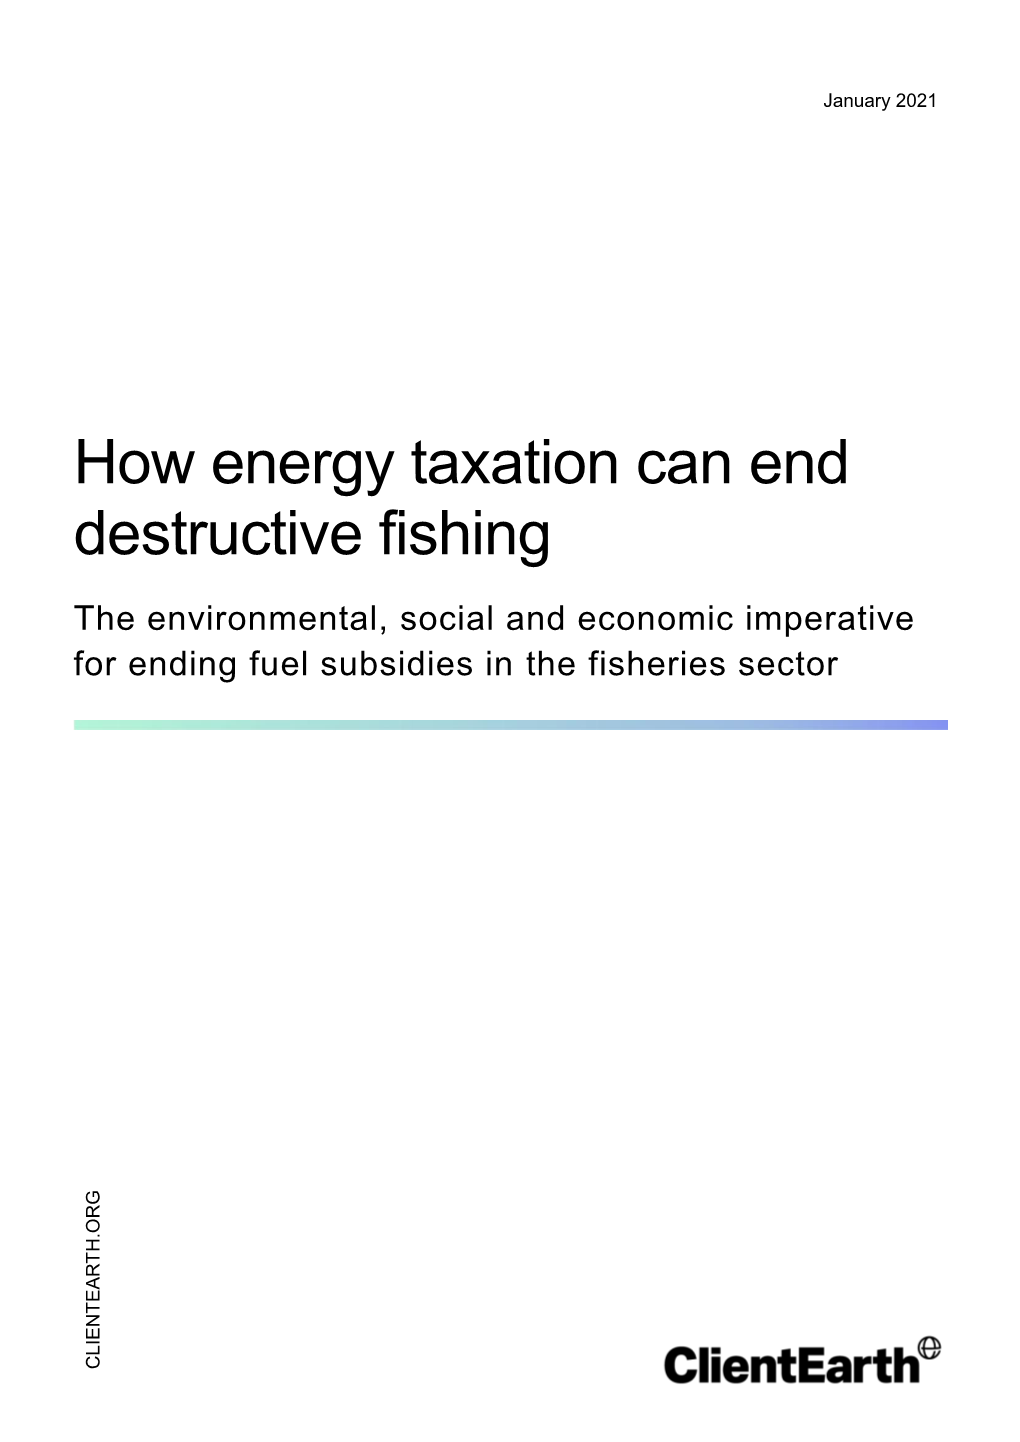 How Energy Taxation Can End Destructive Fishing